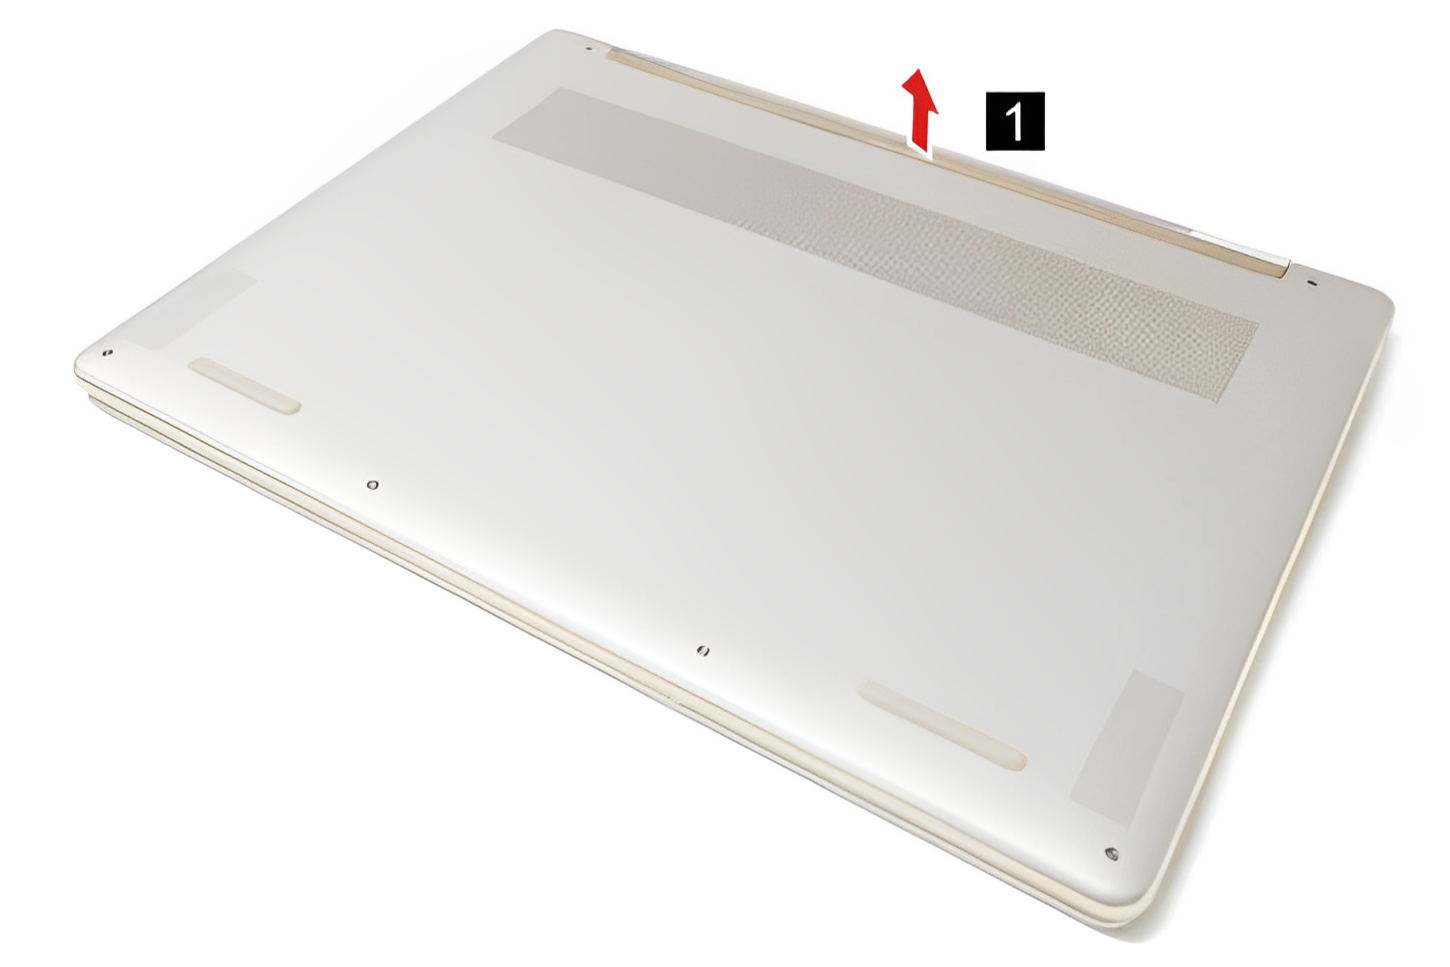 Illustration showing how to remove the rubber feet on Lenovo Yoga 9i